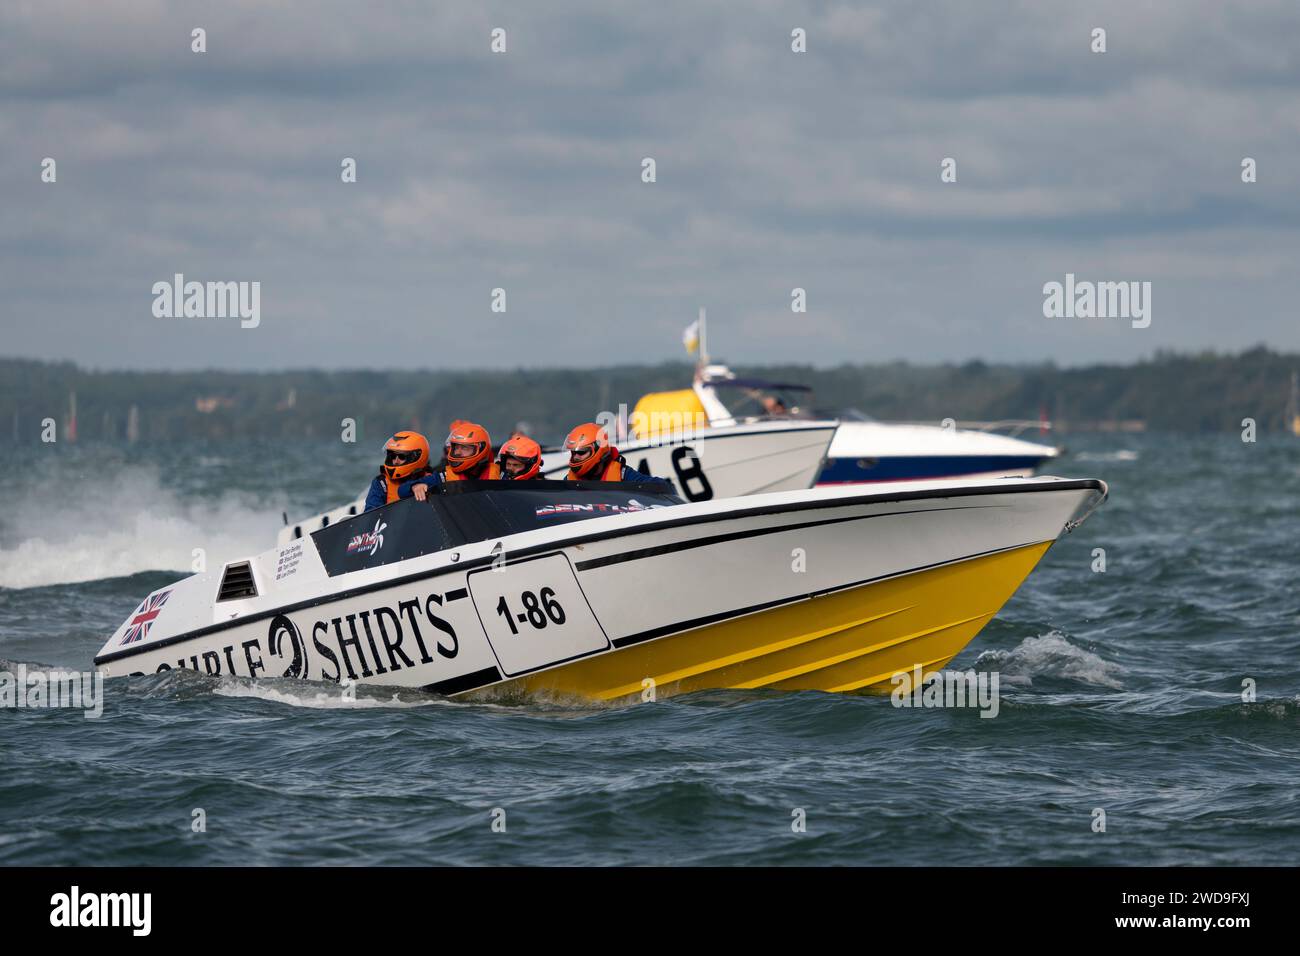 Looks like the crew of 1-86 Double 2 Shirts are waiting for the start gun at the Cowes to Torquay and back powerboat race held in the Solent Stock Photo